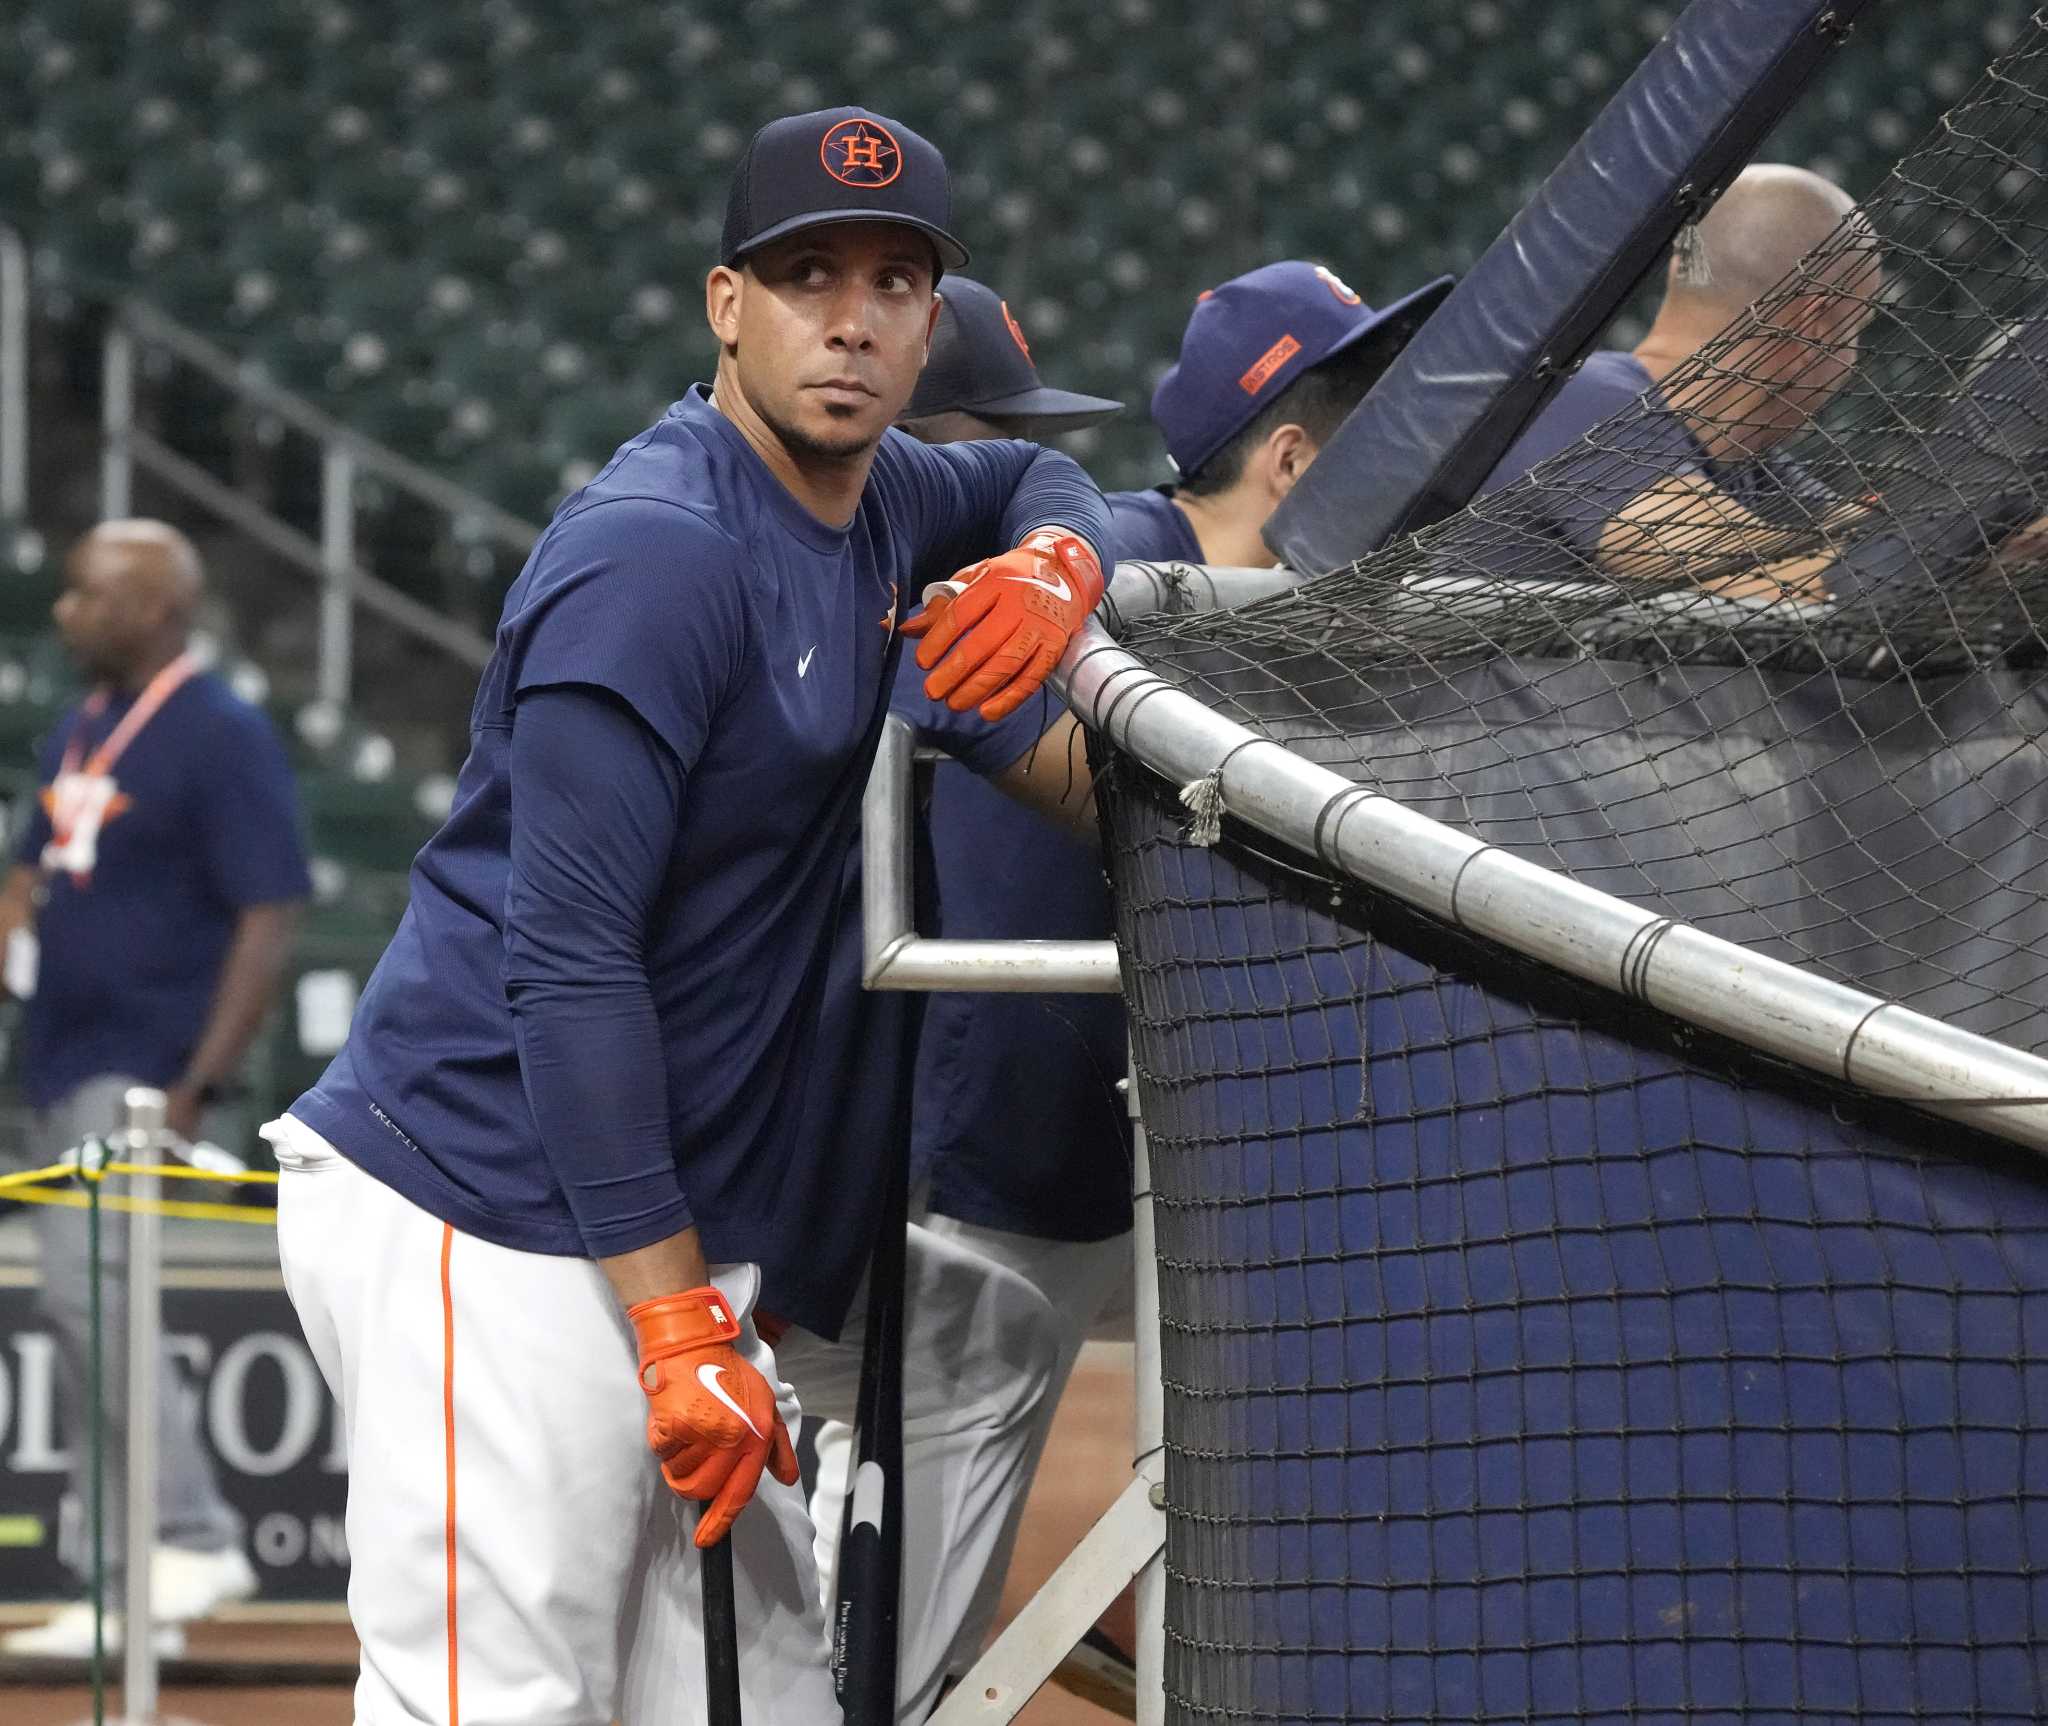 Astros OF dealing with soreness in surgically-repaired shoulder